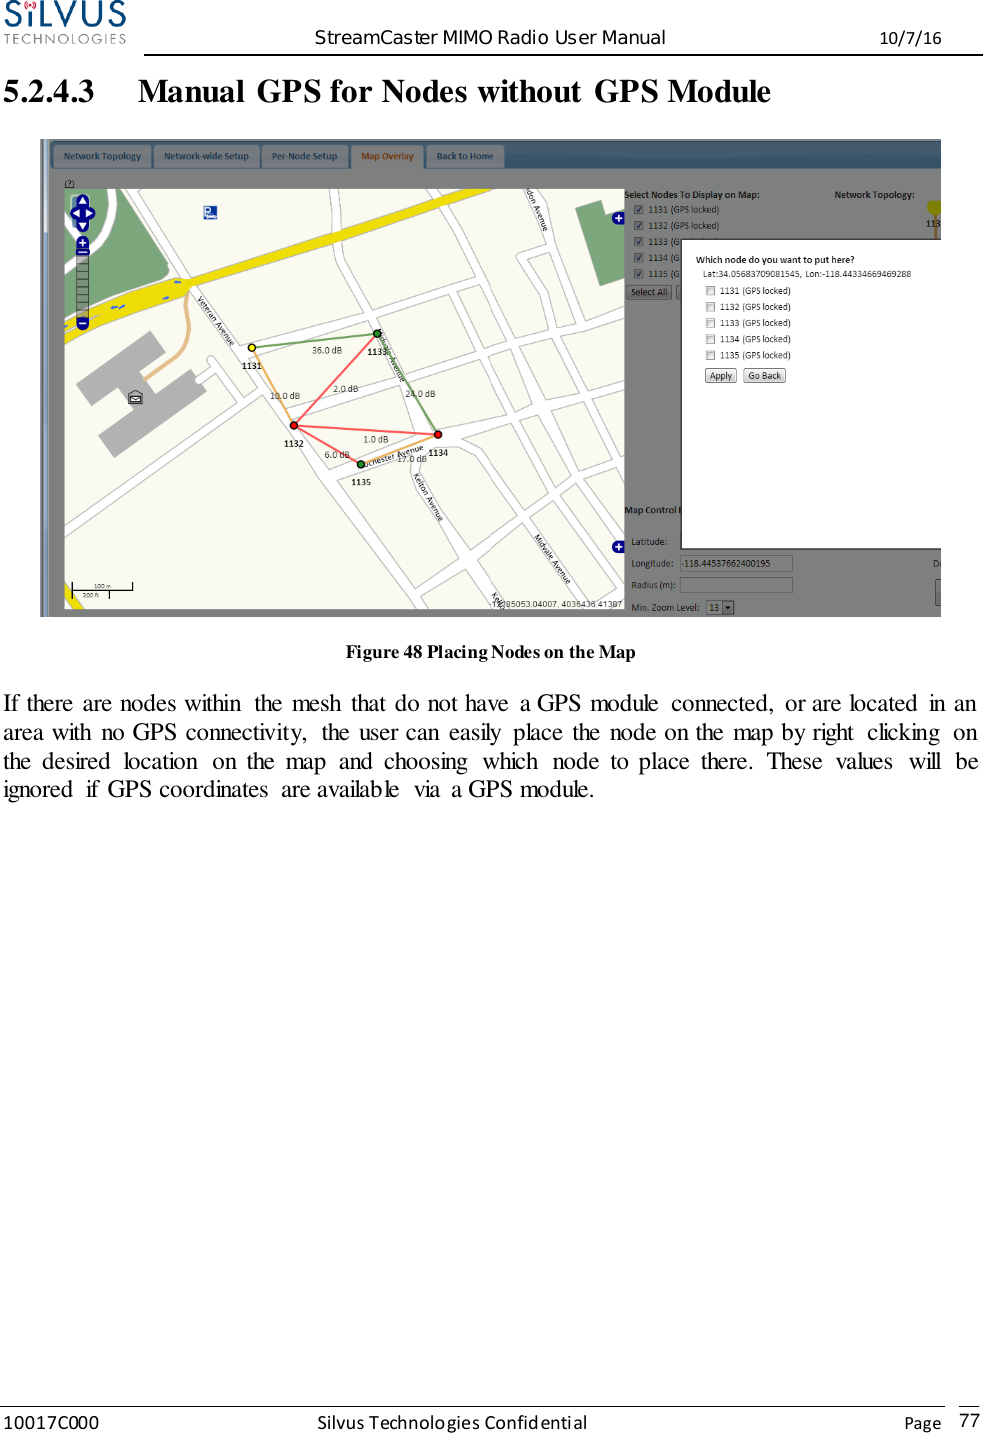  StreamCaster MIMO Radio User Manual  10/7/16 10017C000 Silvus Technologies Confidential    Page   77 5.2.4.3 Manual GPS for Nodes without GPS Module  Figure 48 Placing Nodes on the Map If there are nodes within  the mesh  that do not have  a GPS module  connected,  or are located  in an area with  no GPS connectivity,  the user can  easily  place the node on the map by right  clicking  on the  desired  location  on  the  map  and  choosing  which  node  to place  there.  These  values  will  be ignored  if  GPS coordinates  are available  via  a GPS module.             